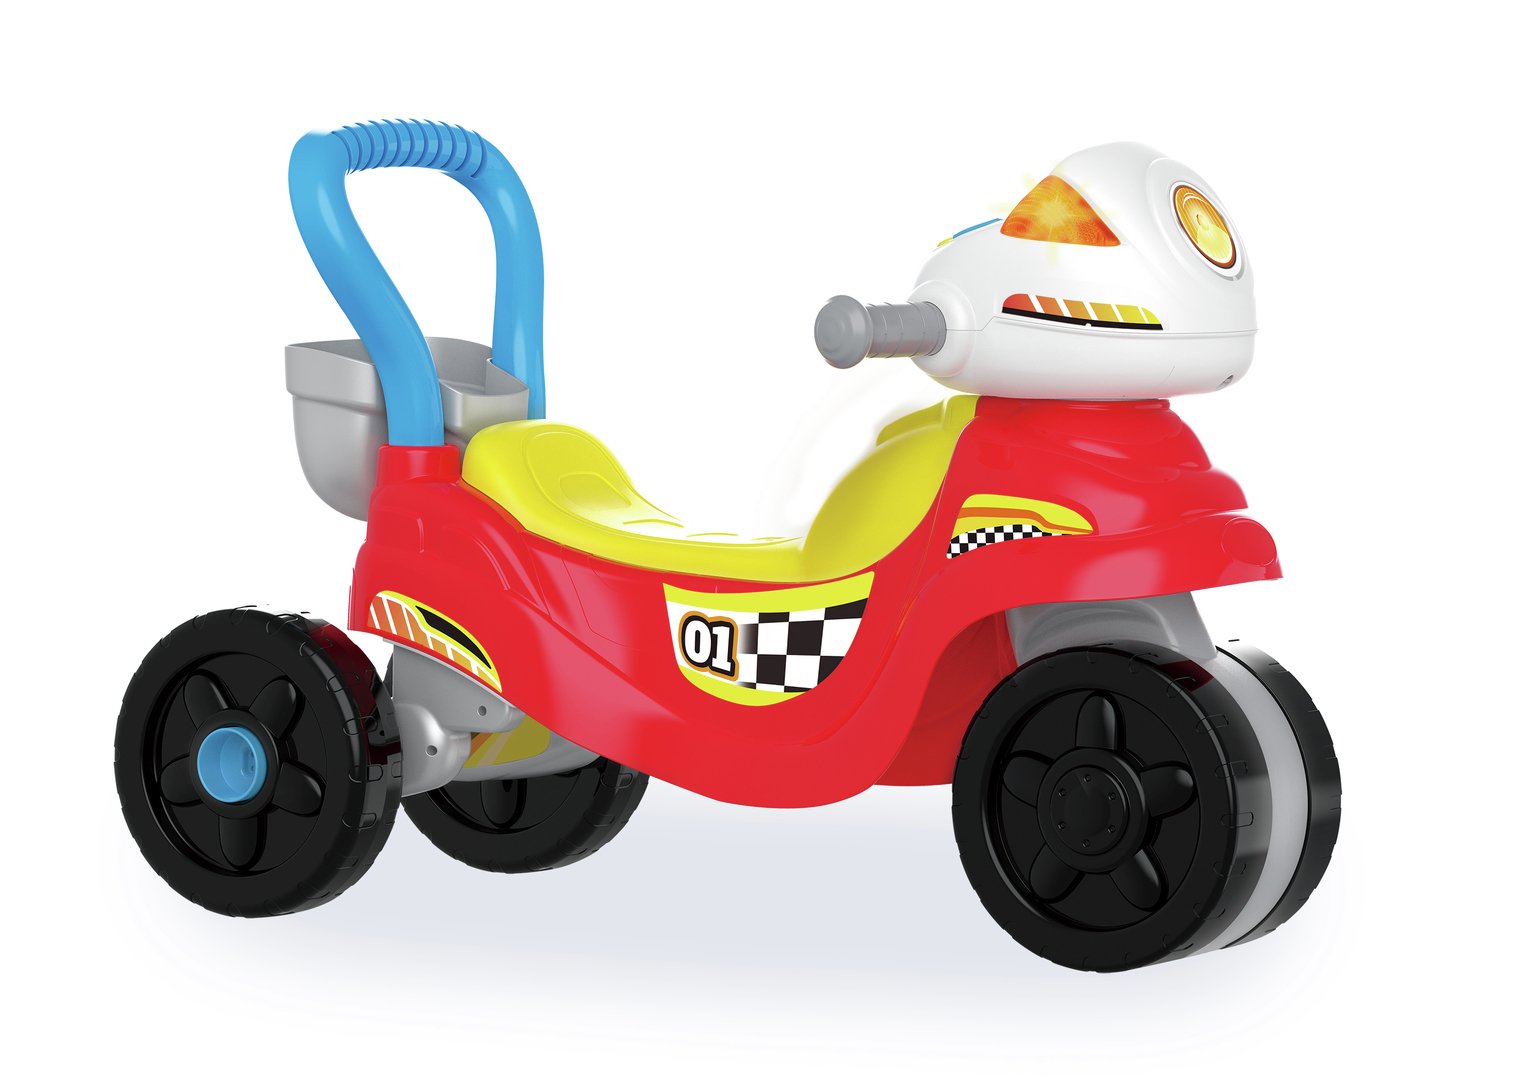 VTech 3-In-1 Ride With Me Motorbike Review